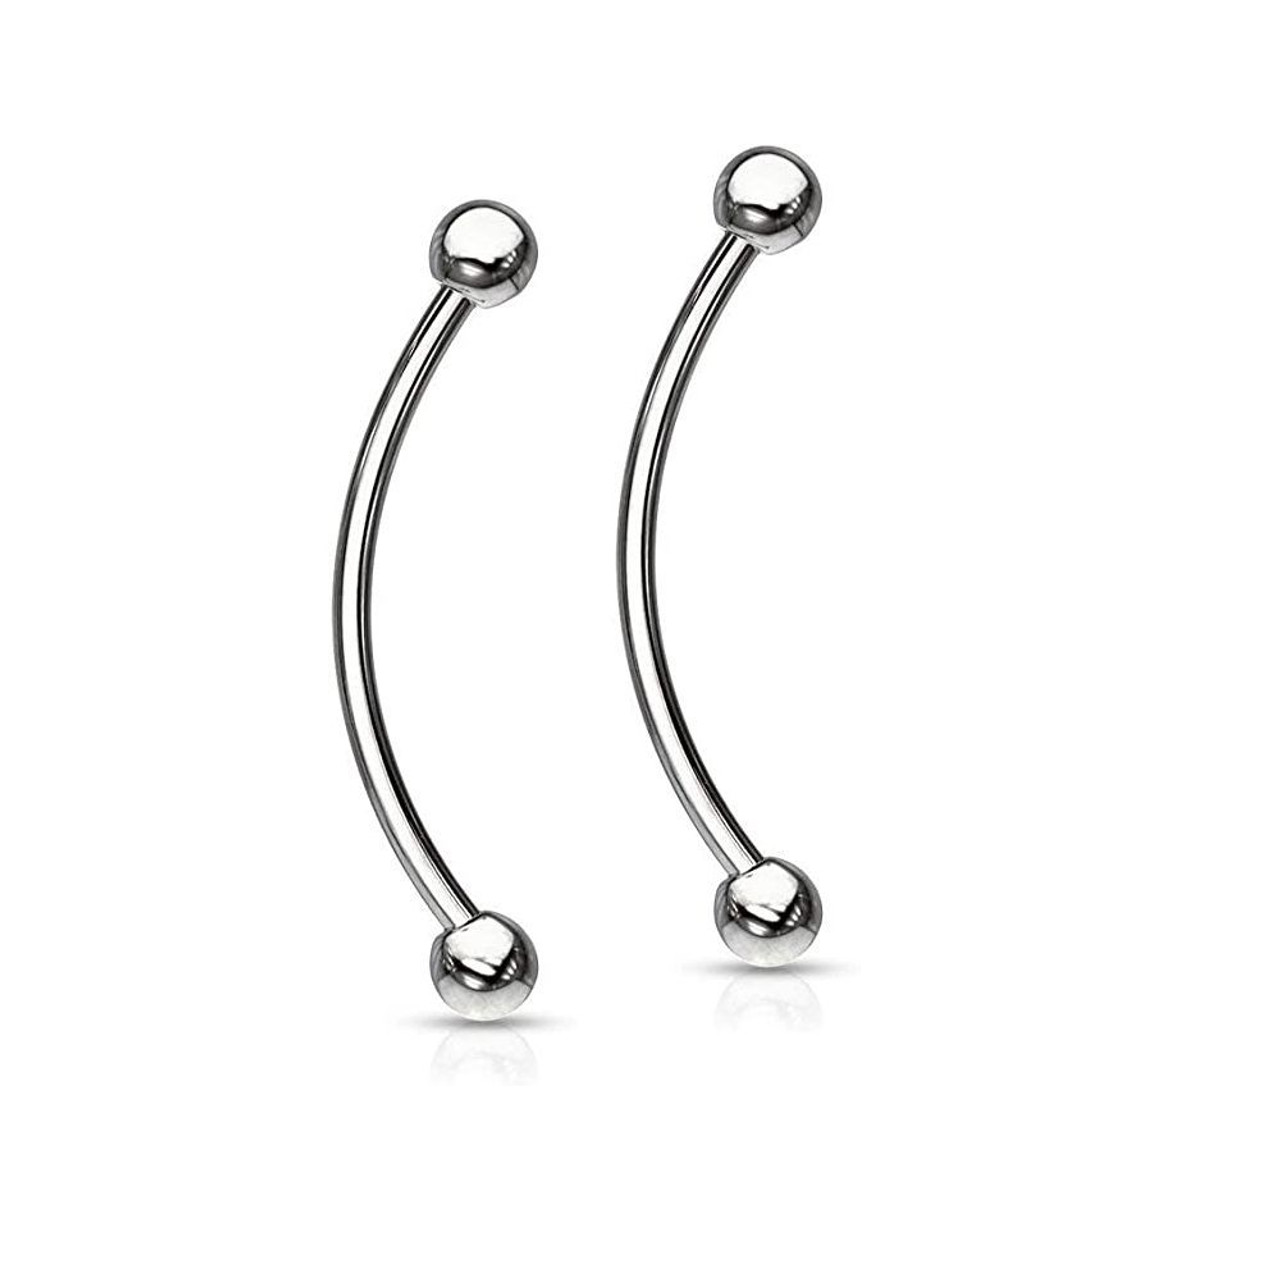 16G 14G Surgical Steel Curved Barbell Tongue Snake-Eyes Piercing 